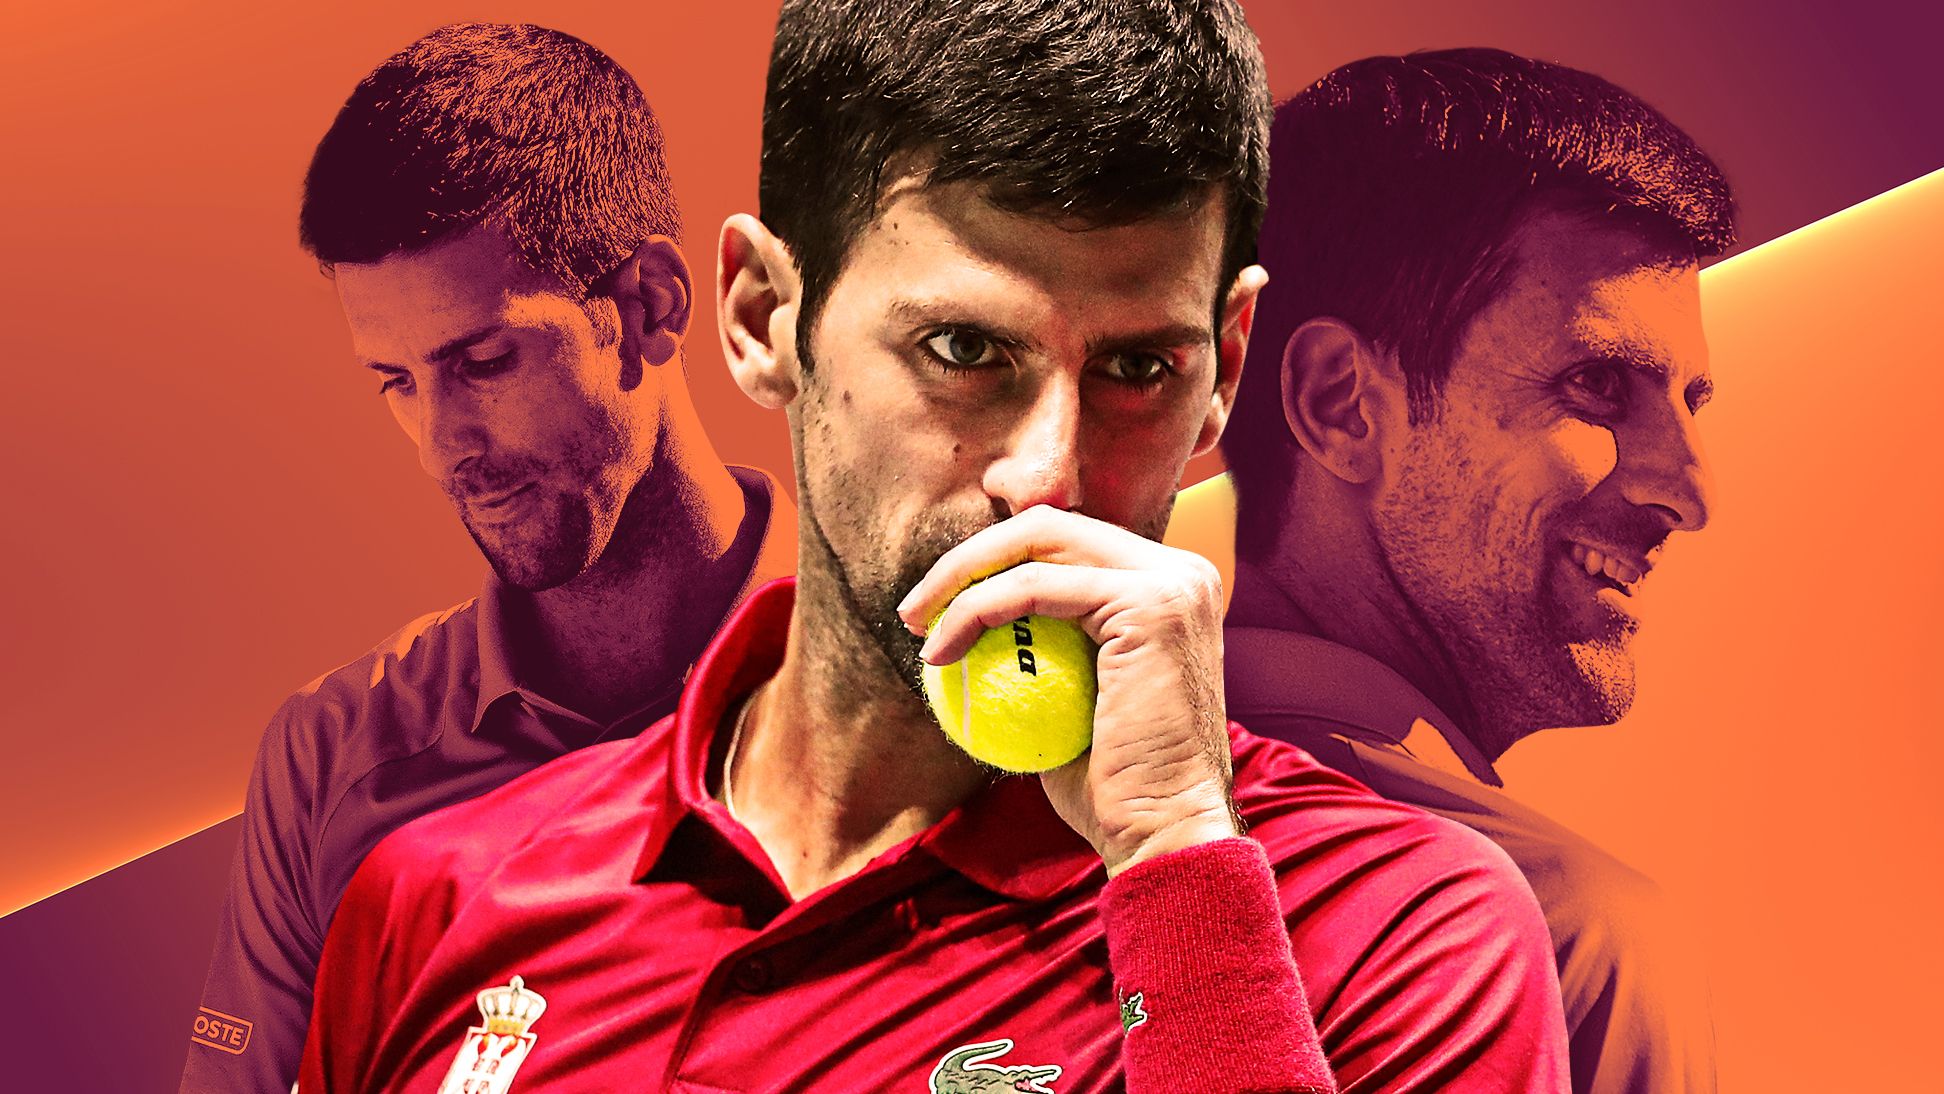 After Australia, can Novak Djokovic find himself again at the